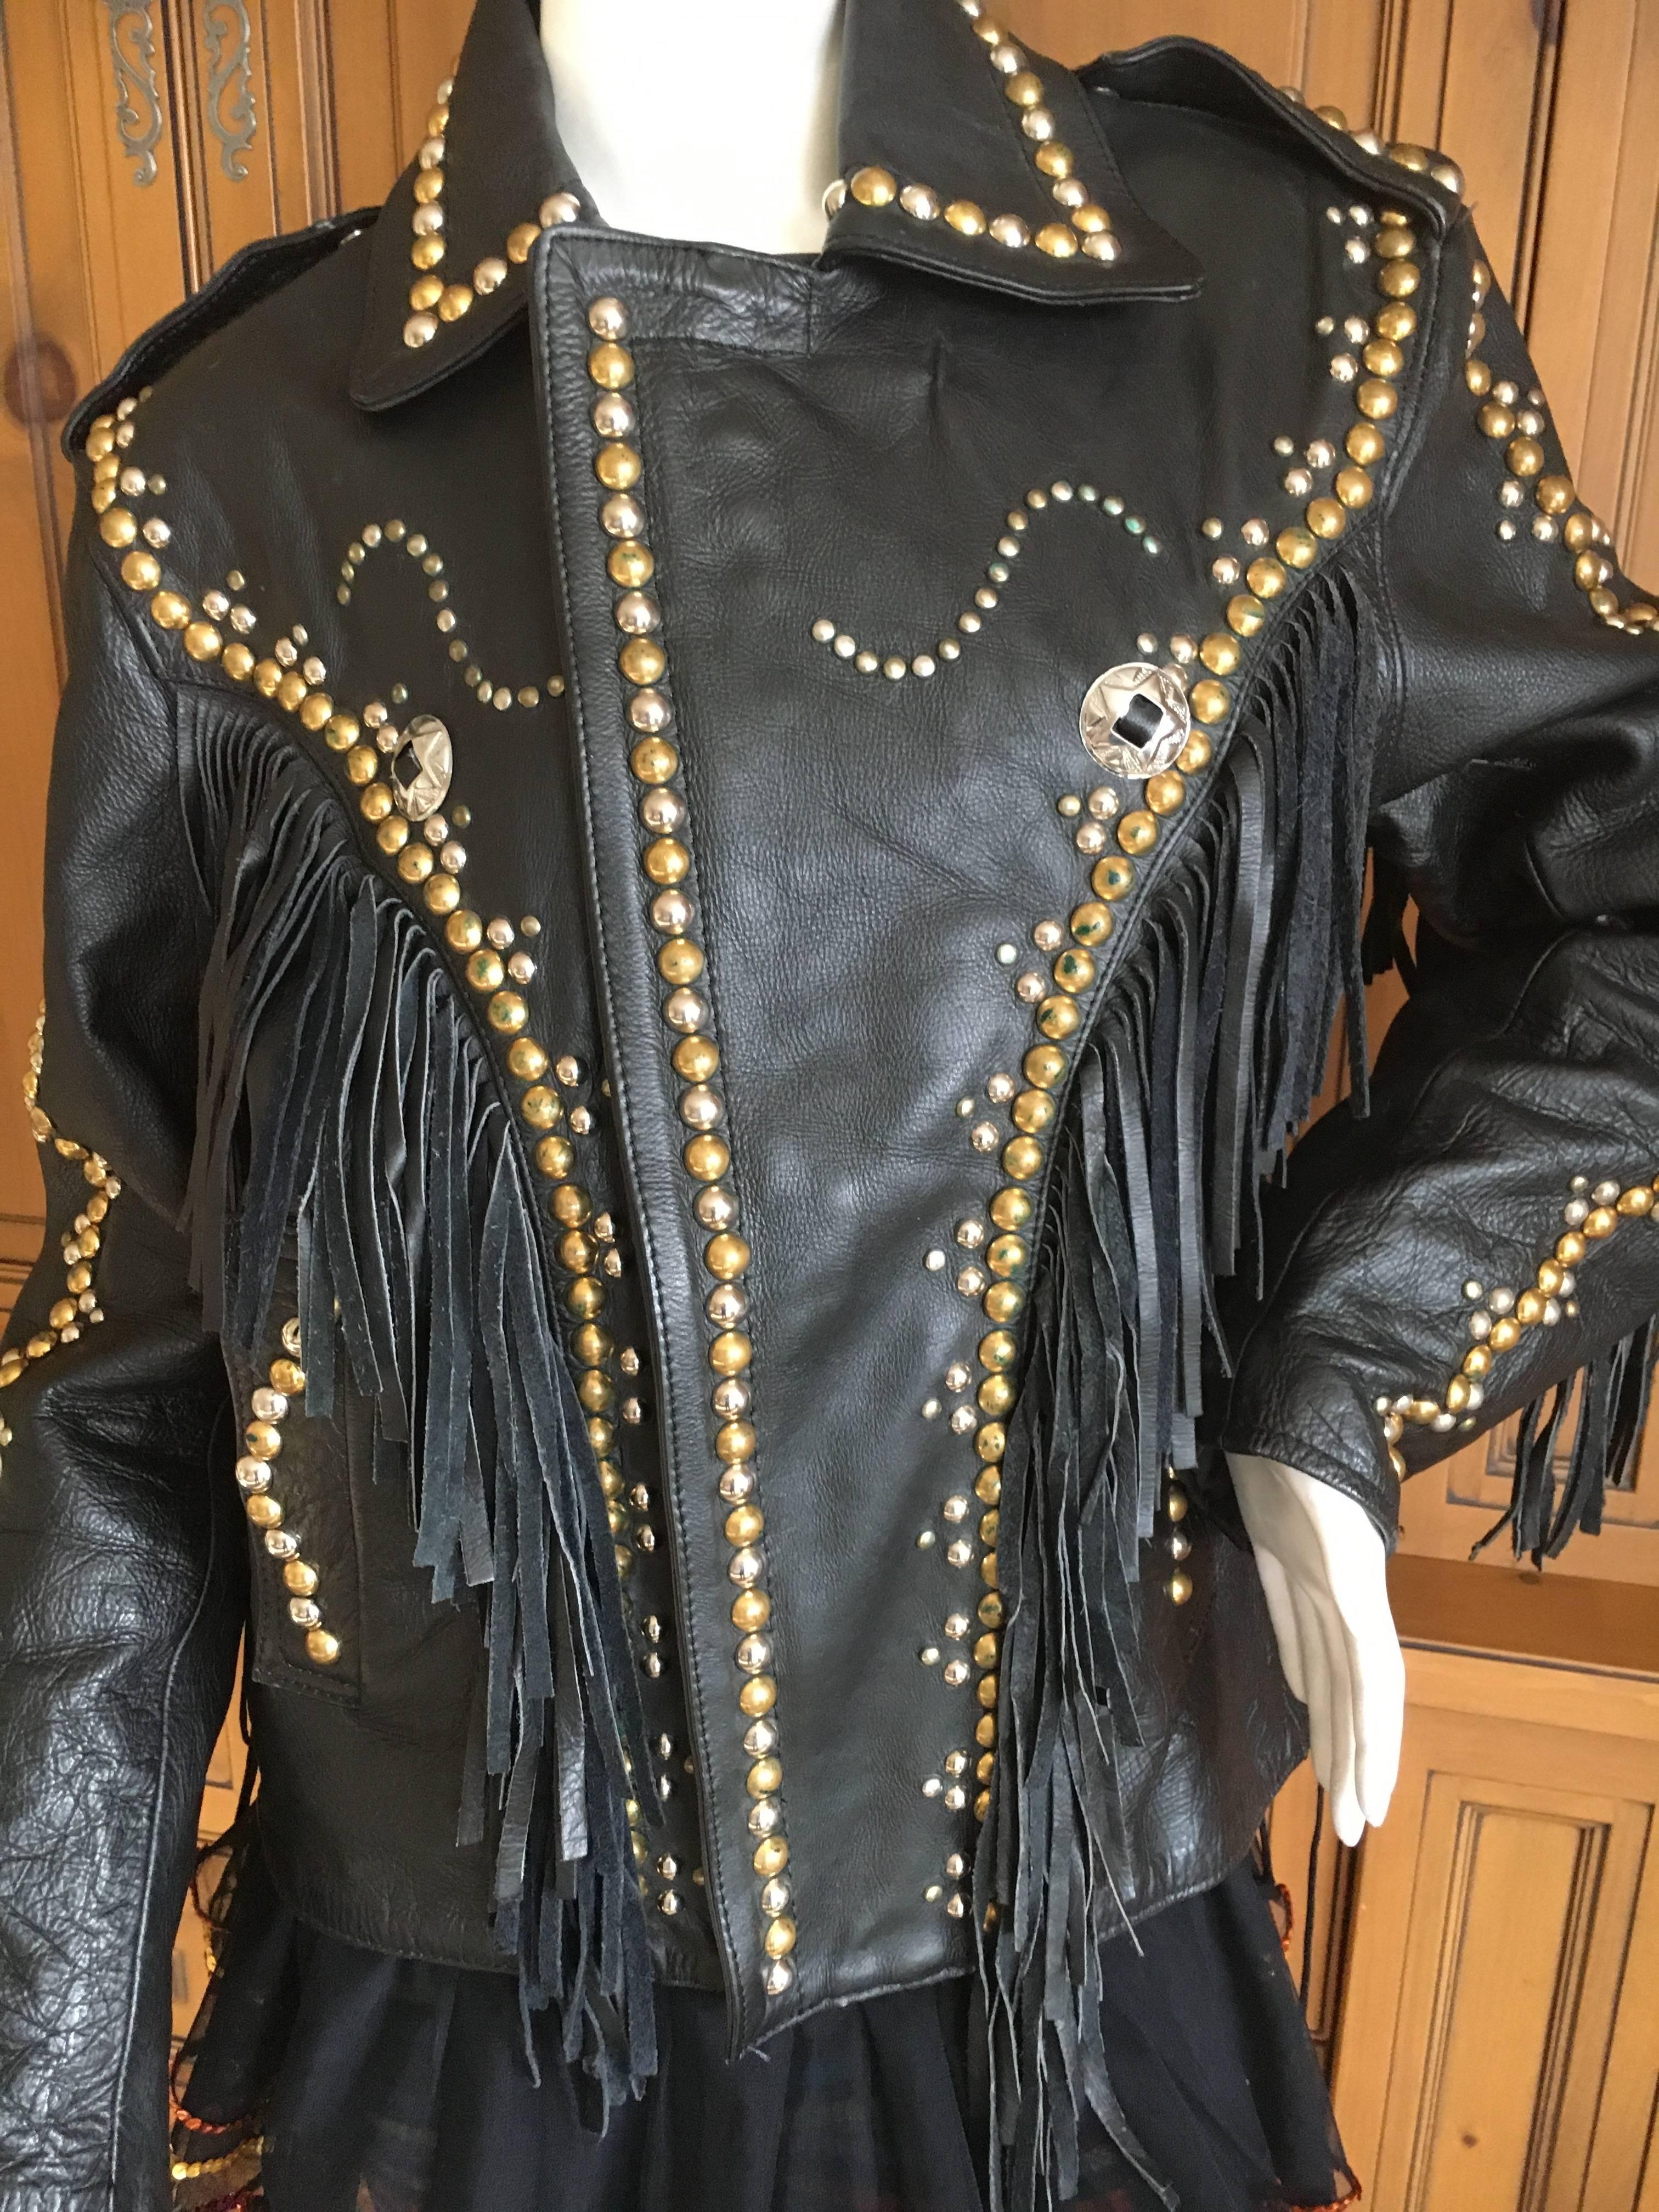 Women's or Men's Vintage Men's Leather Motorcycle Jacket with Fringe and Studs